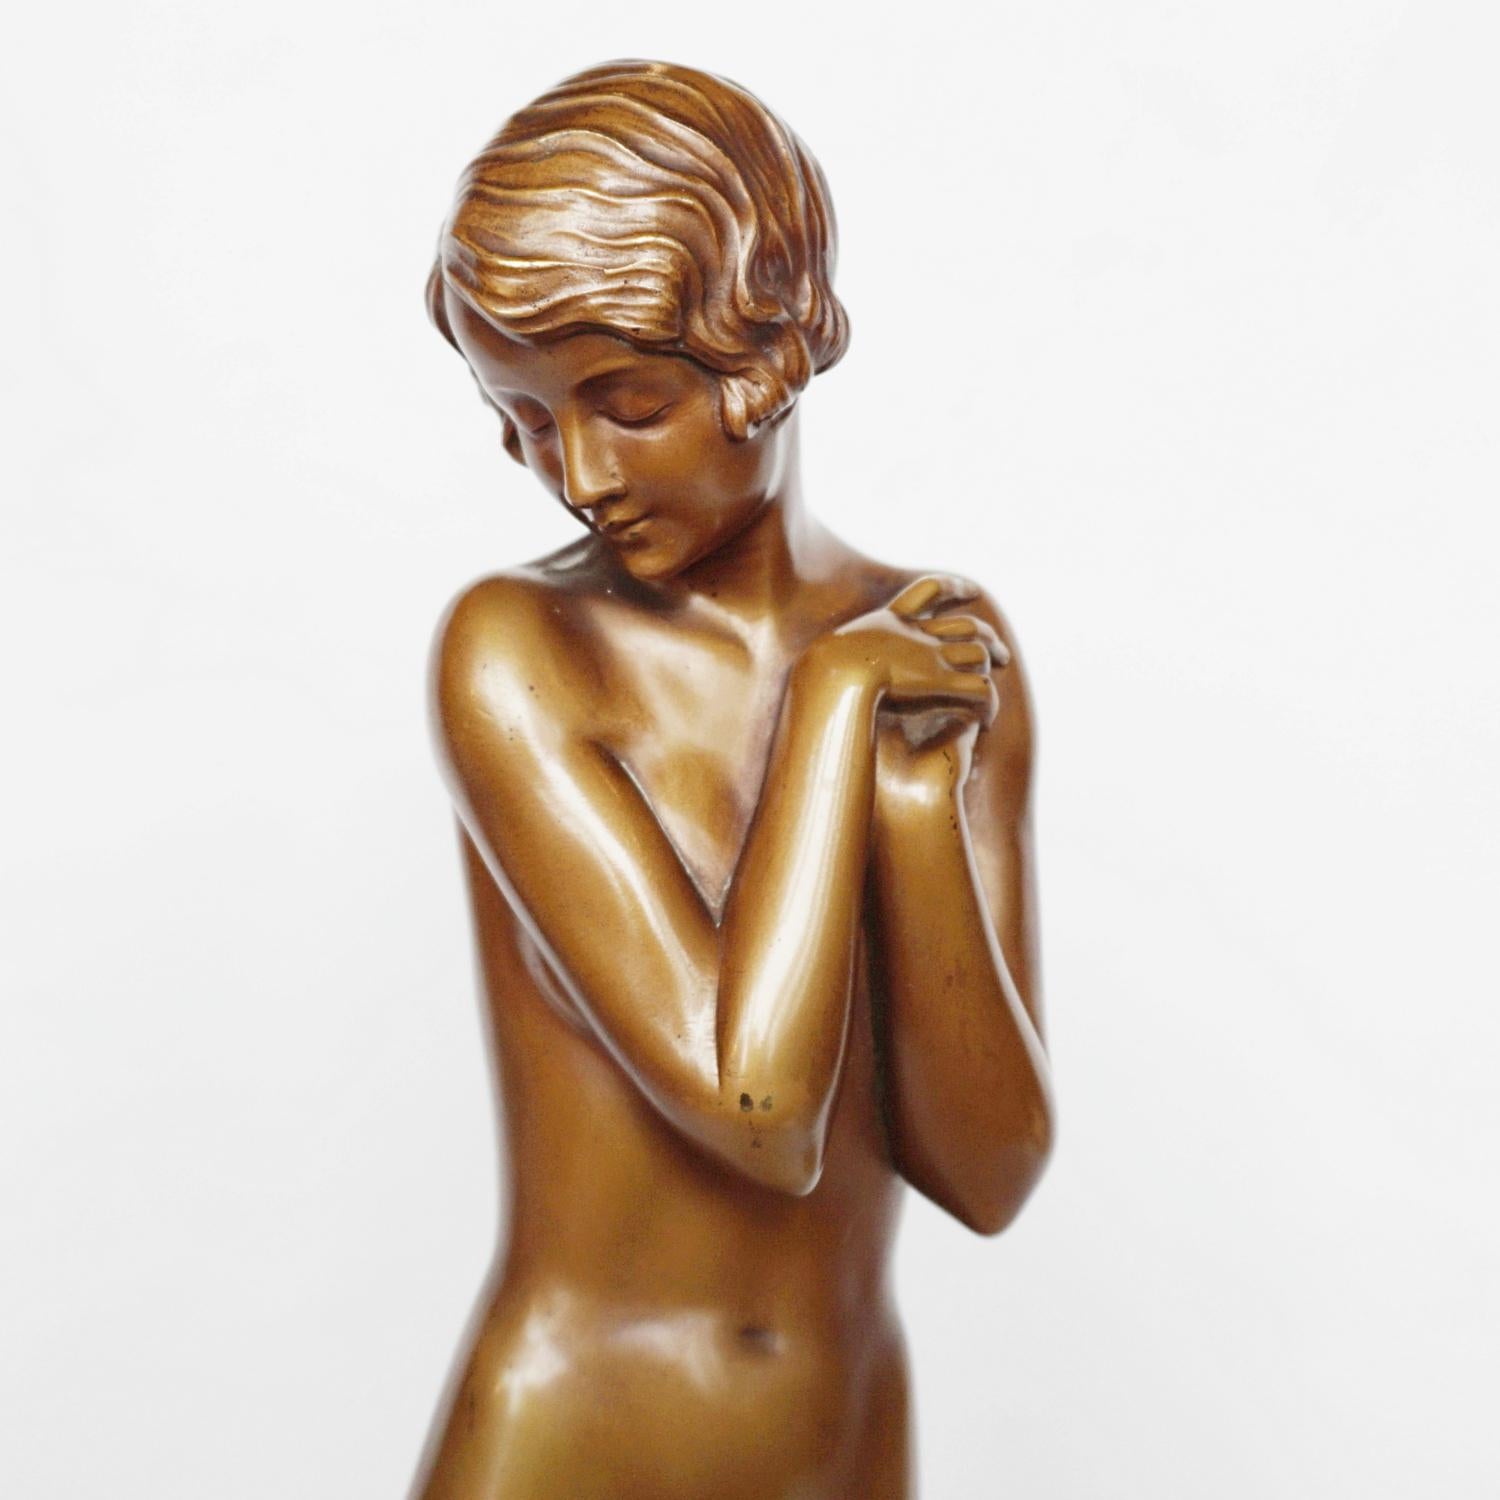 Coy Maiden, a large Art Deco, cold painted bronze figure by Josef Lorenzl (1892-1950). A nude woman standing, concealing her modesty. Set over original marble base. 

Signed Lorenzl to bronze

Josef Lorenzl, born 1stSeptember 1892 began his